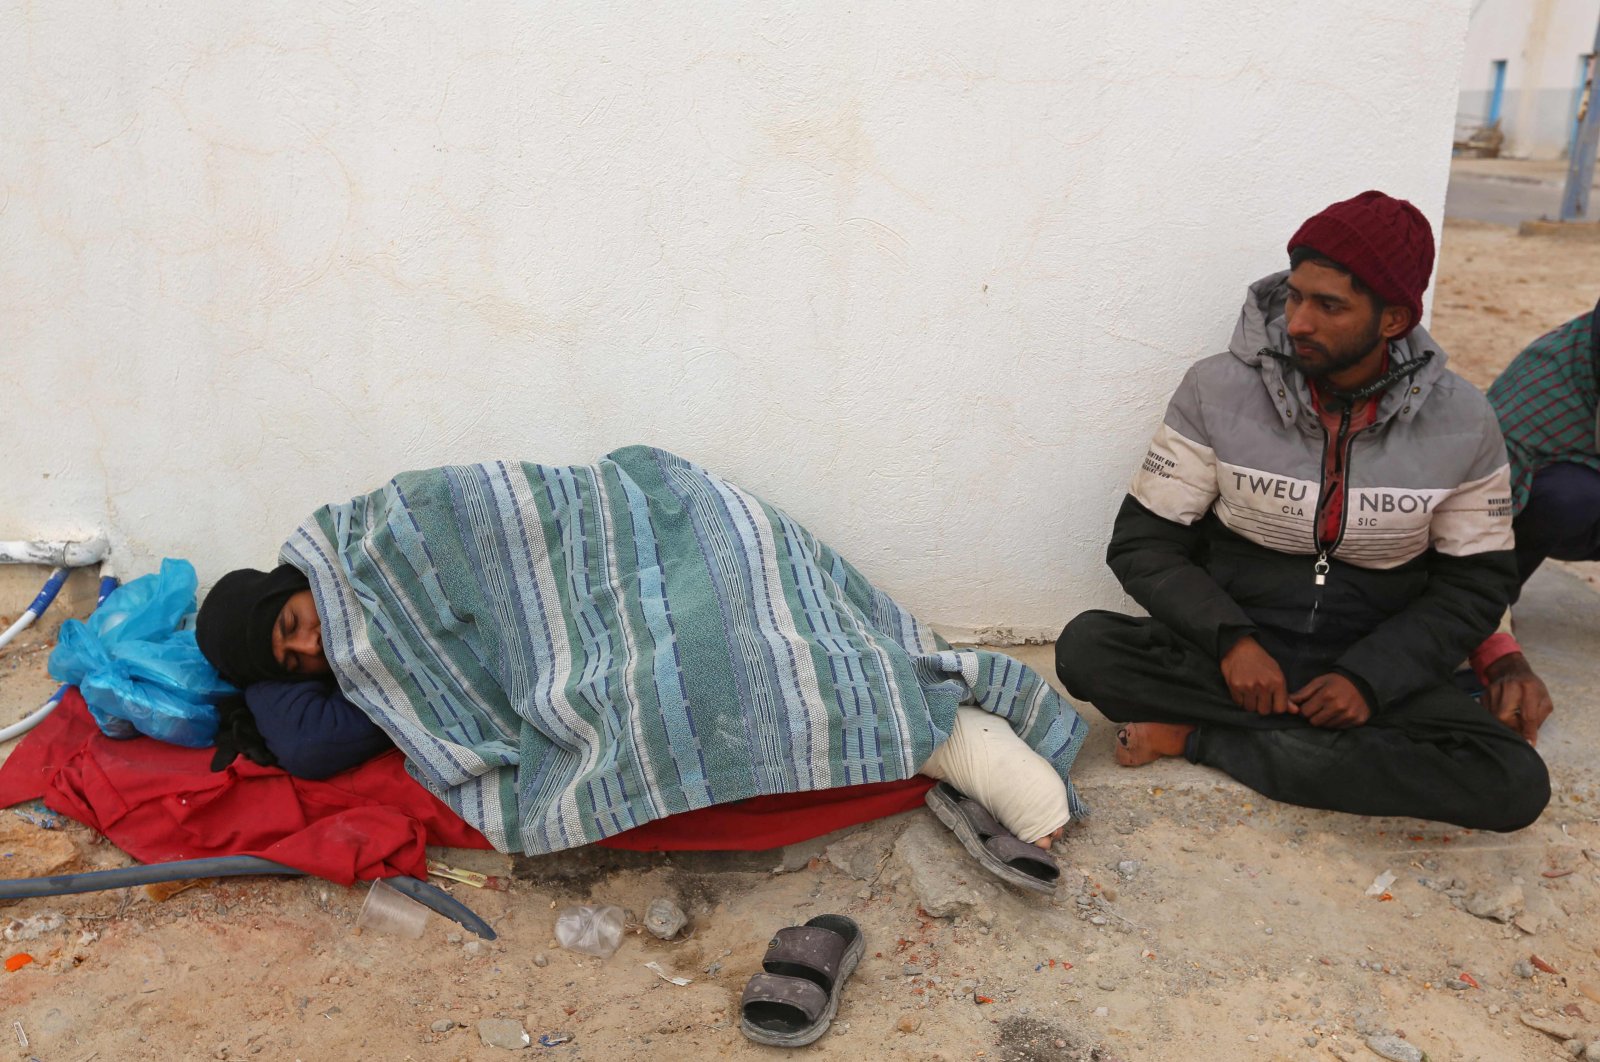 Migrants rescued by Tunisia&#039;s national guard during an attempted crossing of the Mediterranean by boat, rest on the beach at the port of el-Ketef in Ben Guerdane in southern Tunisia near the border with Libya, on Jan. 6, 2022. (AFP)